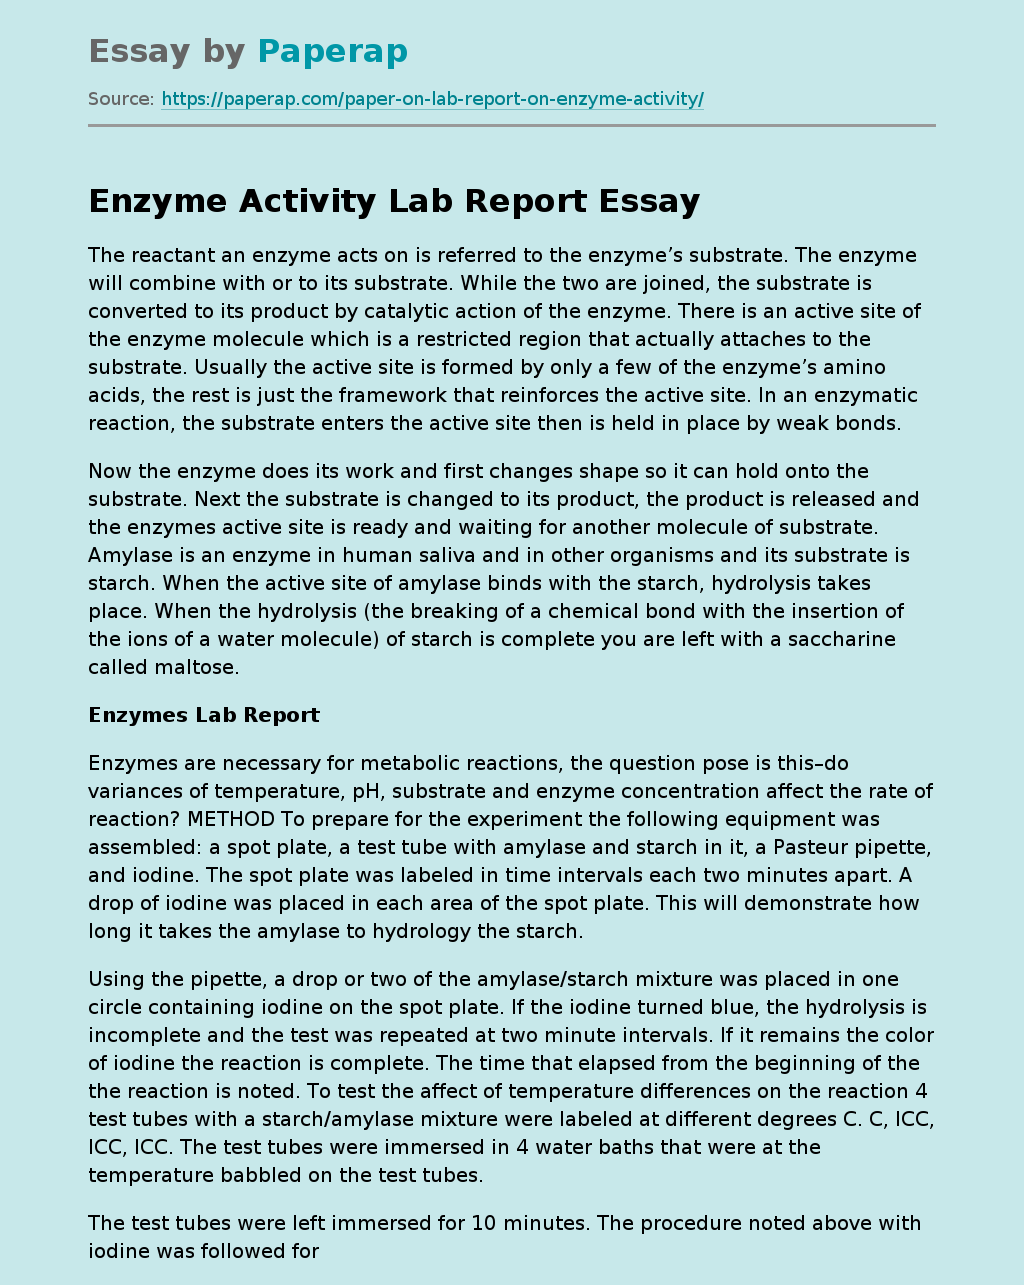 Enzyme Activity Lab Report